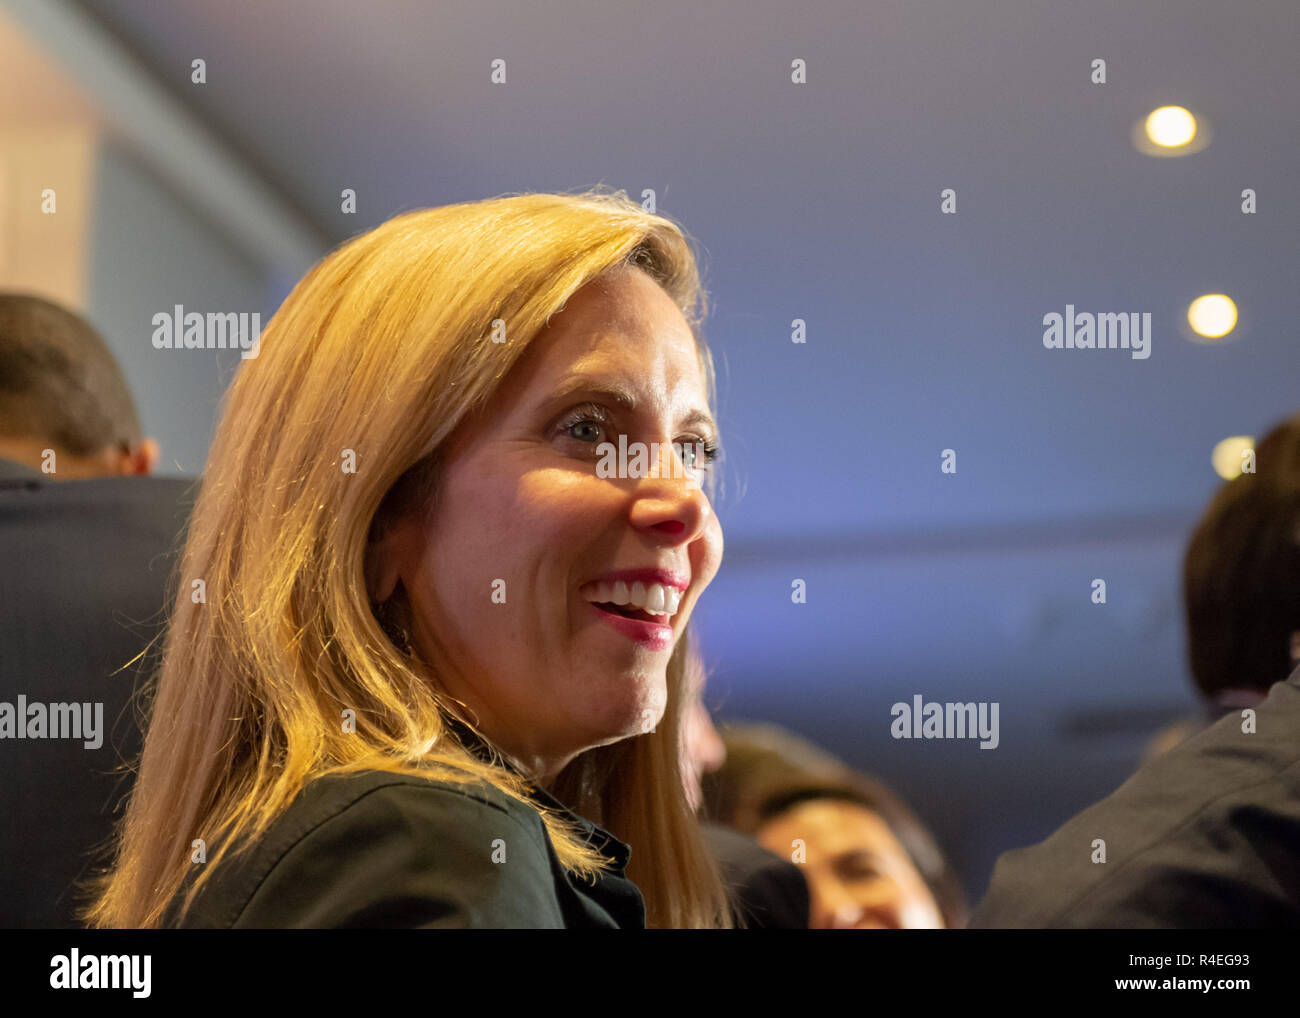 November 6, 2018 - Garden City, New York, United States - Town Supervisor LAURA GILLEN joins candidates and elected officials on stage as Nassau County Democrats watch Election Day results at Garden City Hotel, Long Island. (Credit Image: © Ann Parry/ZUMA Wire) Stock Photo